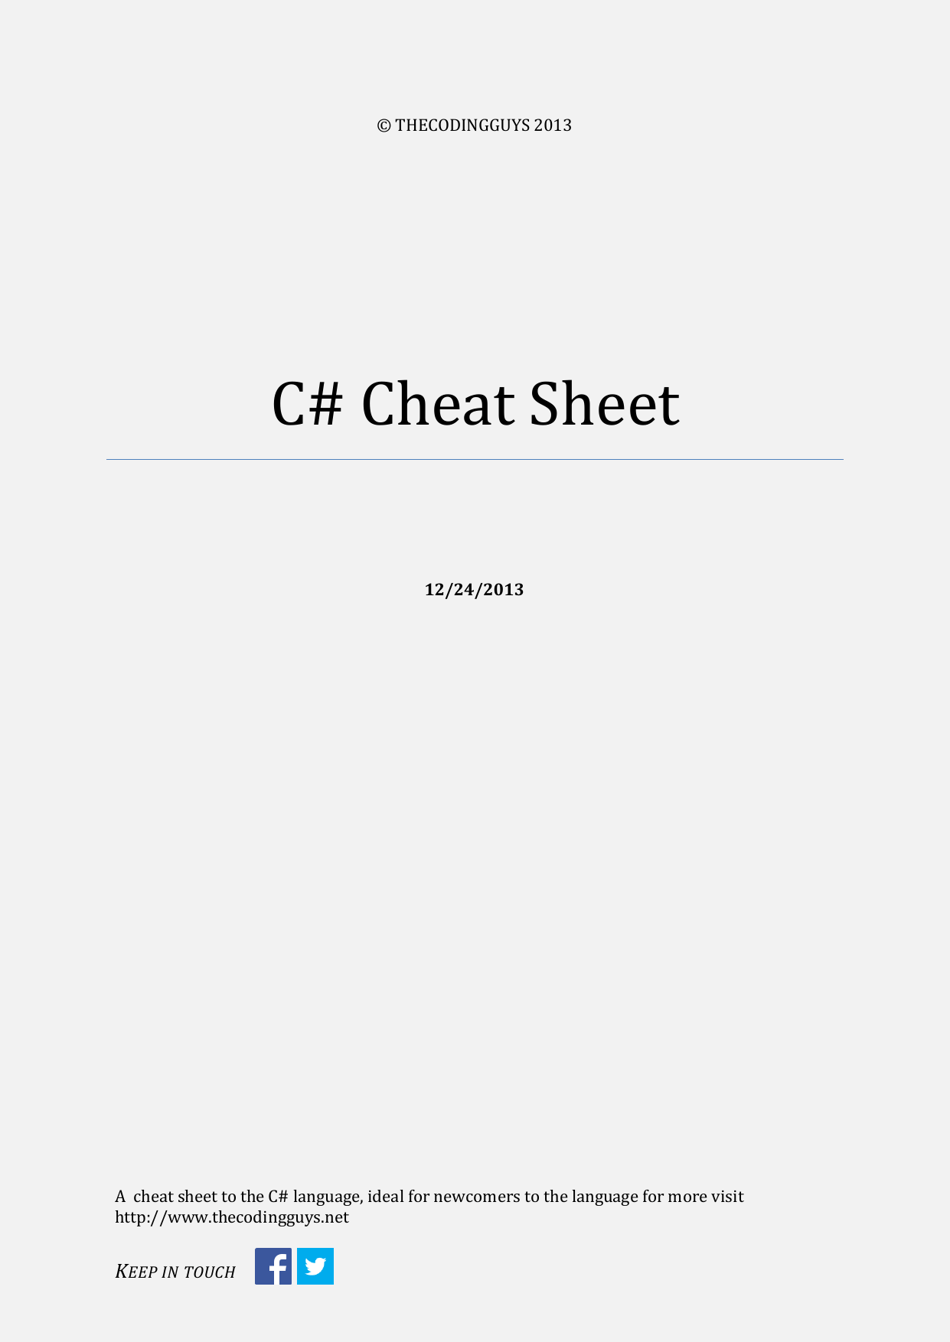 C# Cheat Sheet in Grey ['Name of the document', 'color Grey']